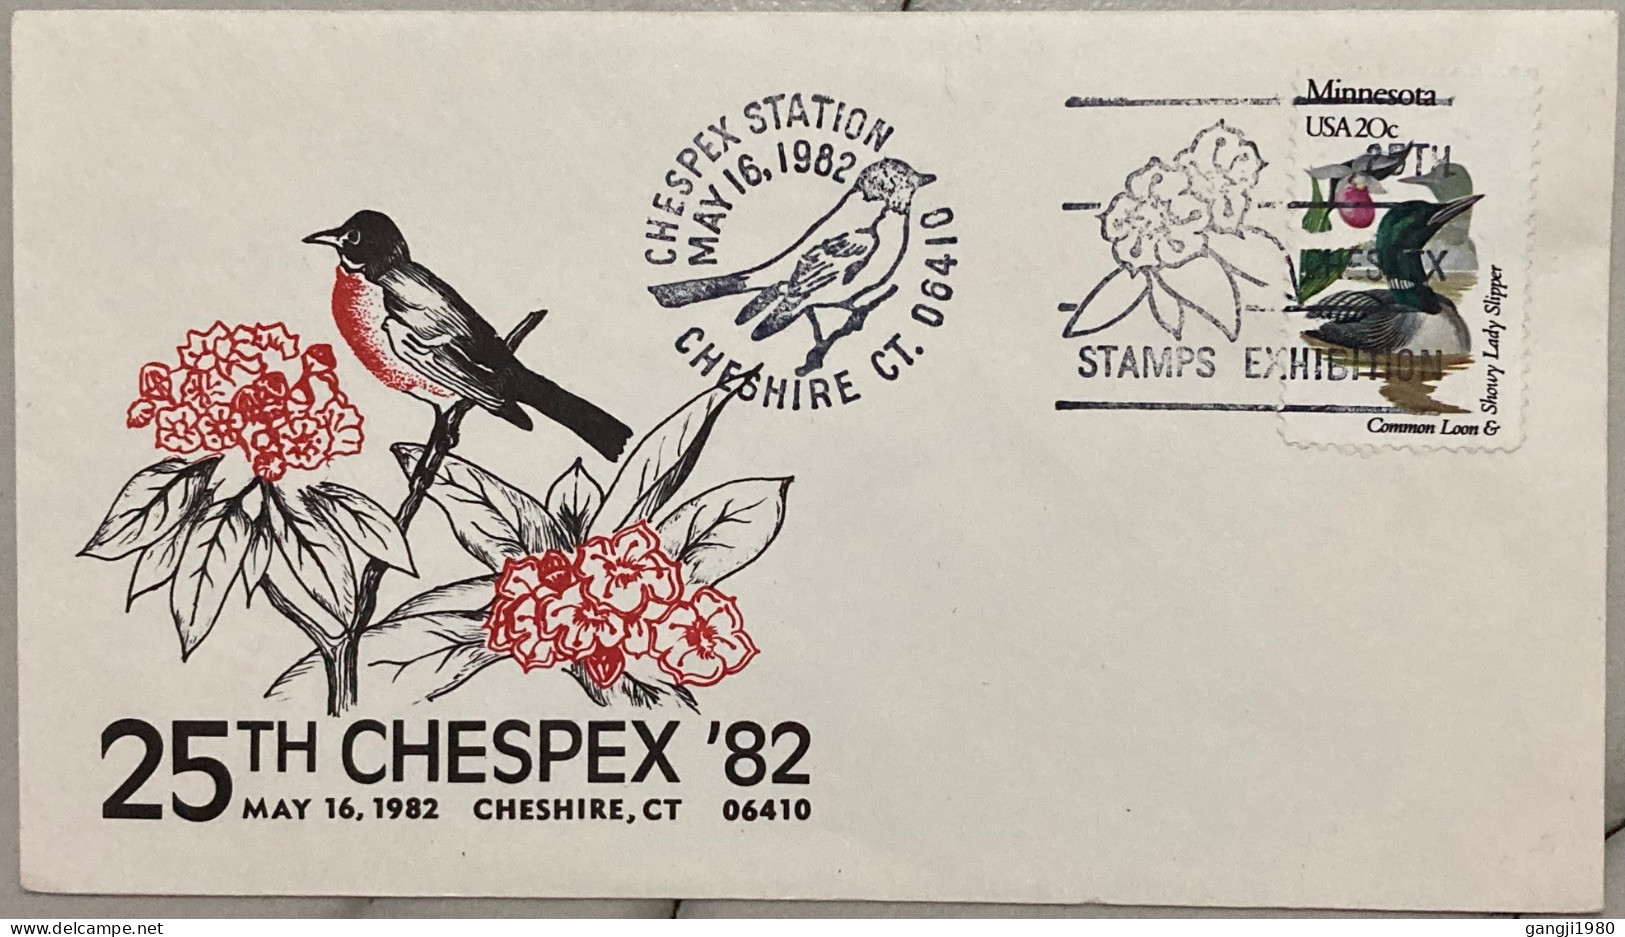 USA 1982, SPECIAL ILLUSTRATED, BIRD COVER, CHESPEX 1982, CHESHIRE CITY. FLOWER PLANT & BIRD PICTURE CANCEL - Mechanical Postmarks (Advertisement)